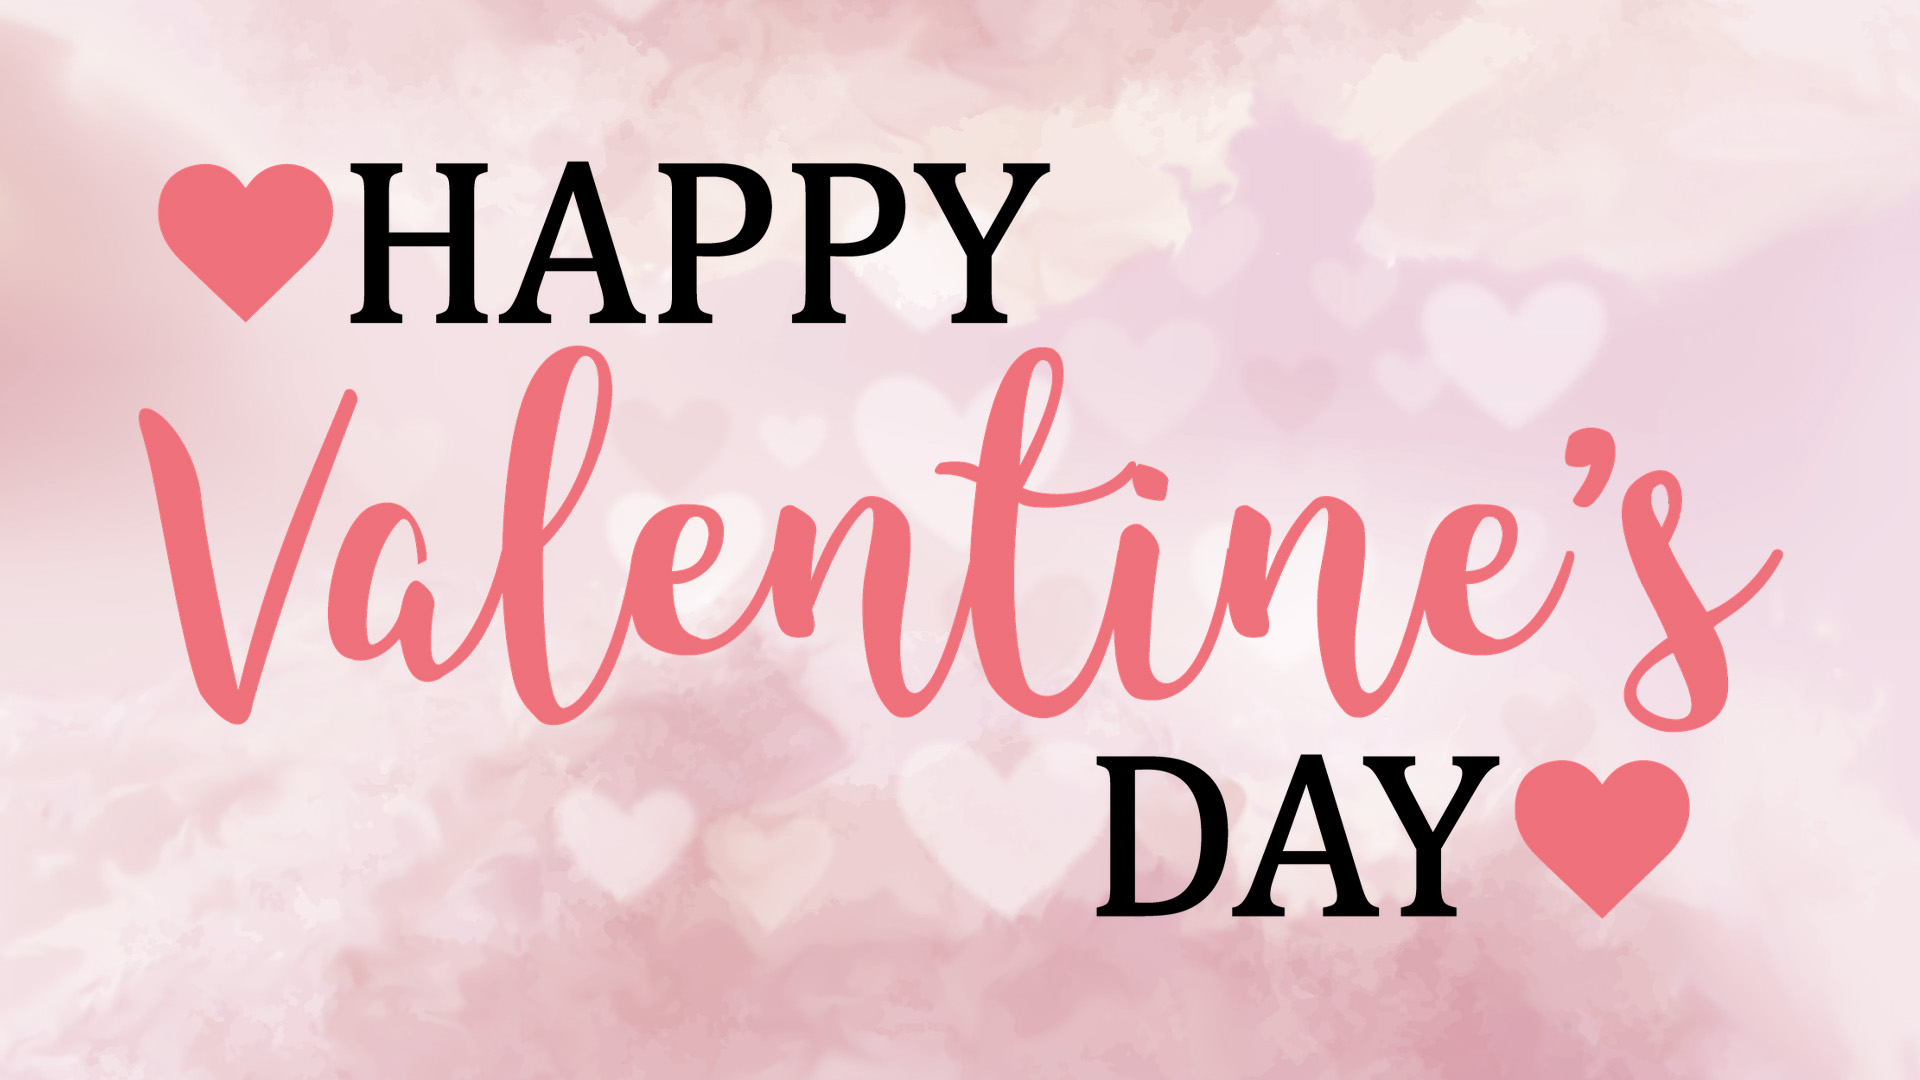 Light Pink washed out background with subtle hearts. Black and pink text span across the graphic reading "Happy Valentine's Day"